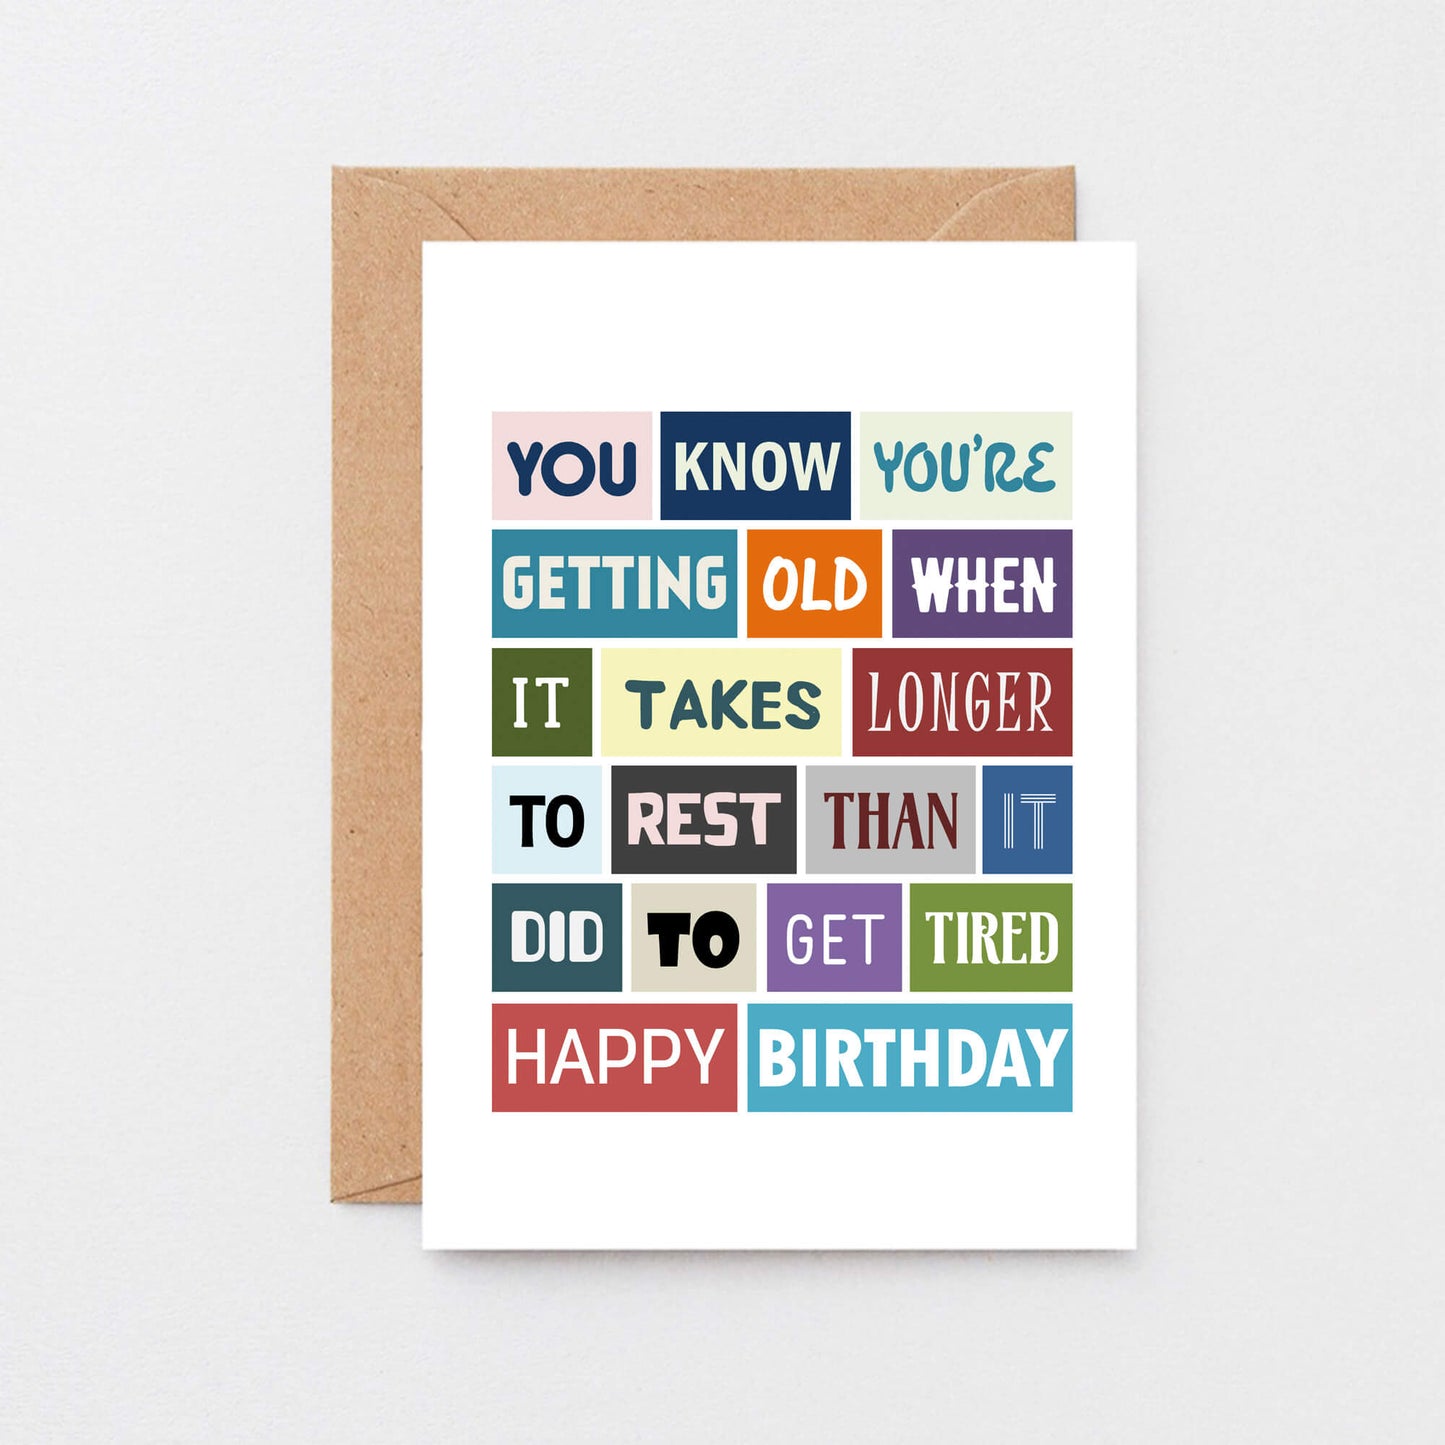 Funny Birthday Card by SixElevenCreations. Reads You know you're getting old when it takes longer to rest than it did to get tired. Happy birthday. Product Code SE0044A6